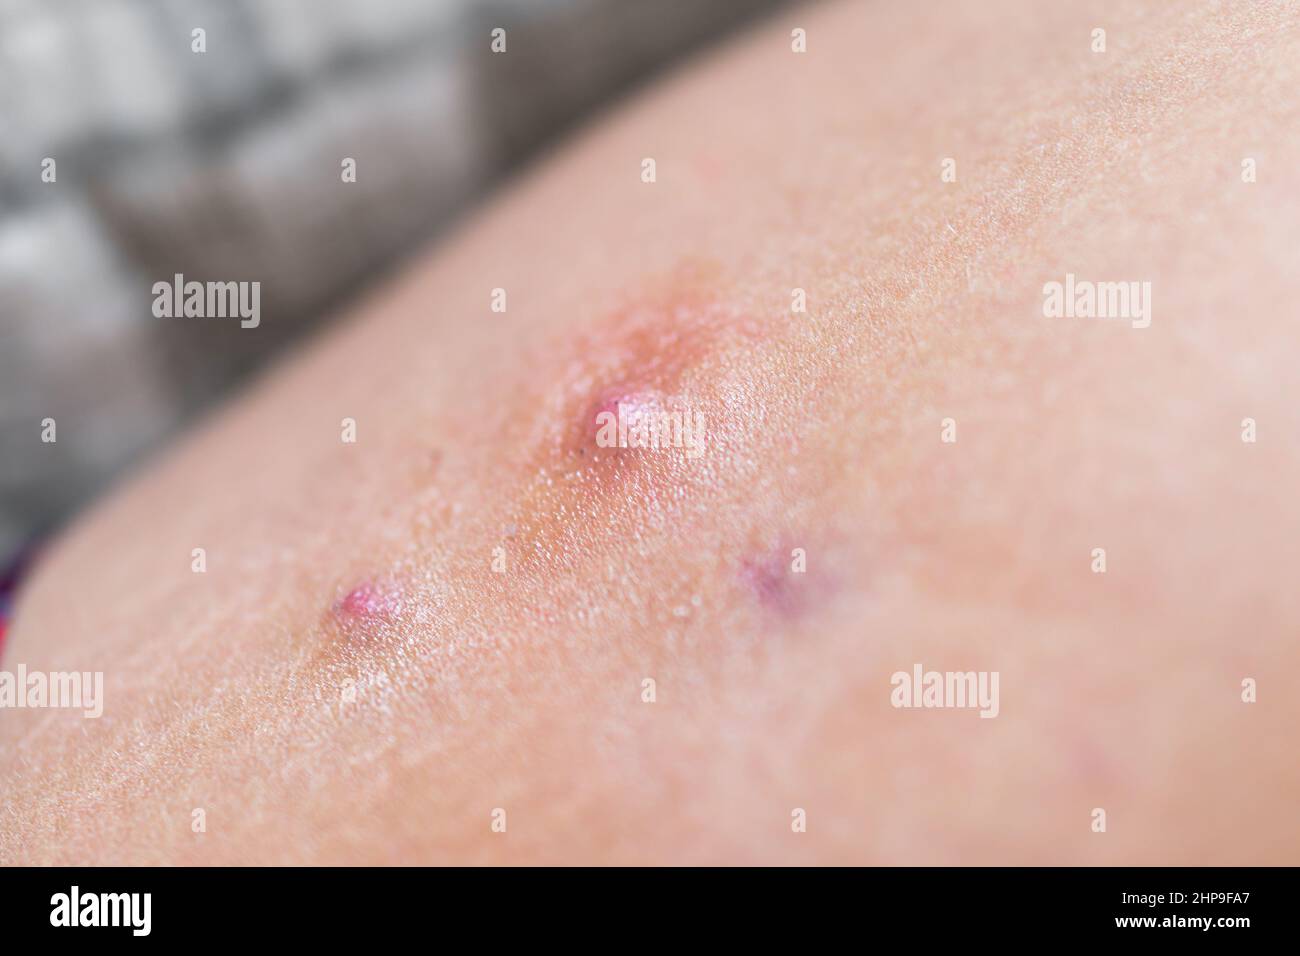 Macro closeup of red swollen boil pimple on leg skin of female woman showing medical condition called hidradenitis suppurativa Stock Photo